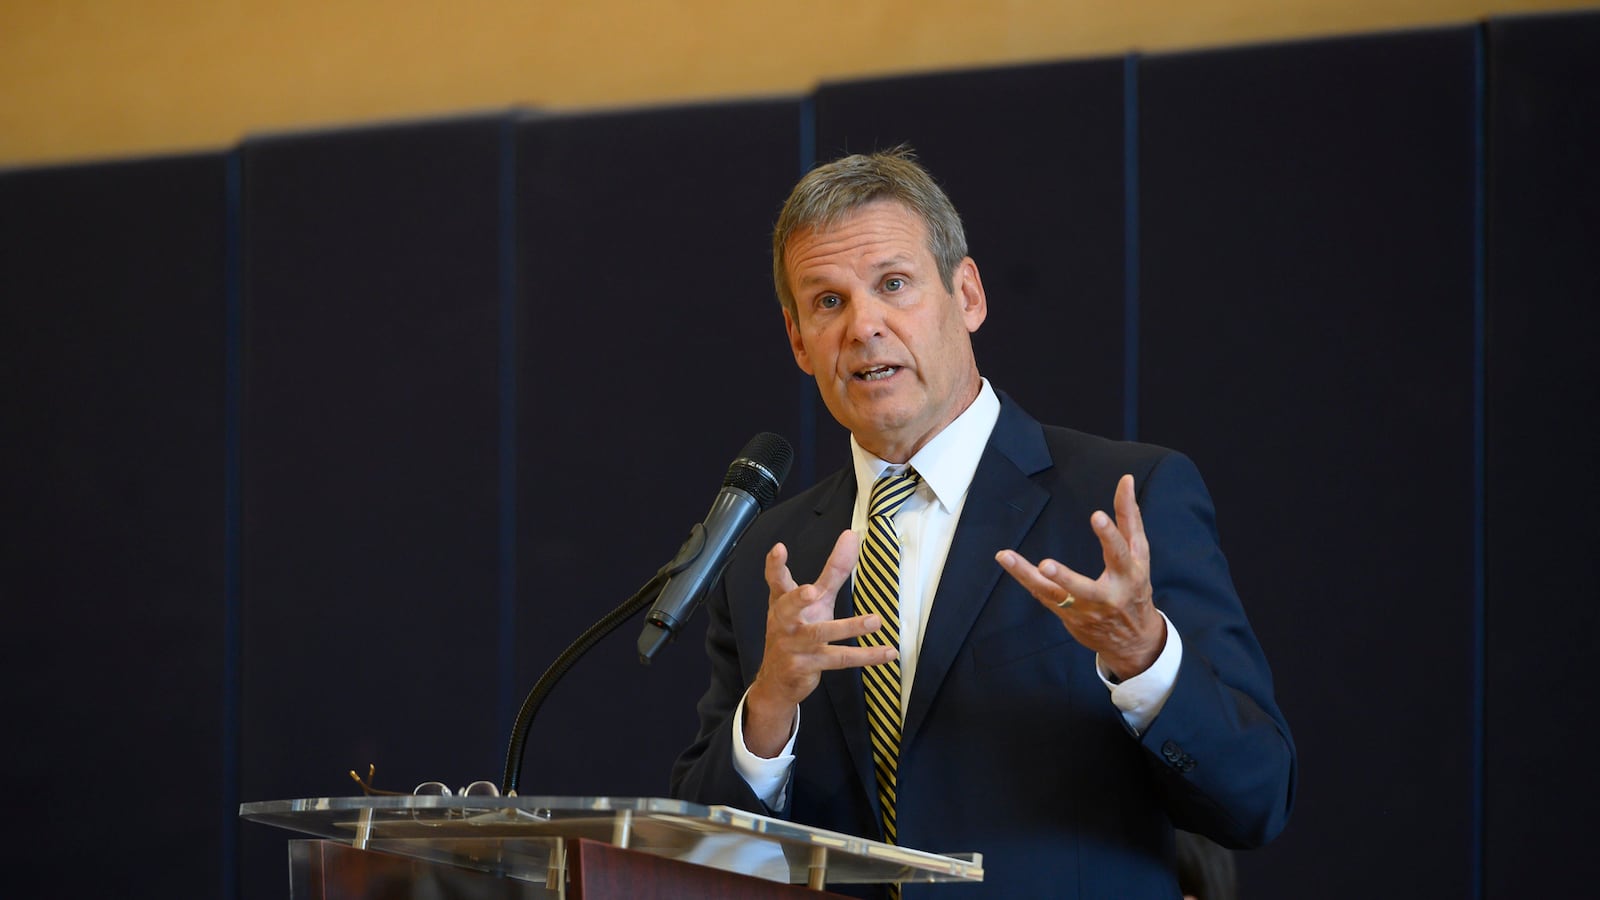 Gov. Bill Lee, a Republican businessman from Williamson County, took office in January of 2019.